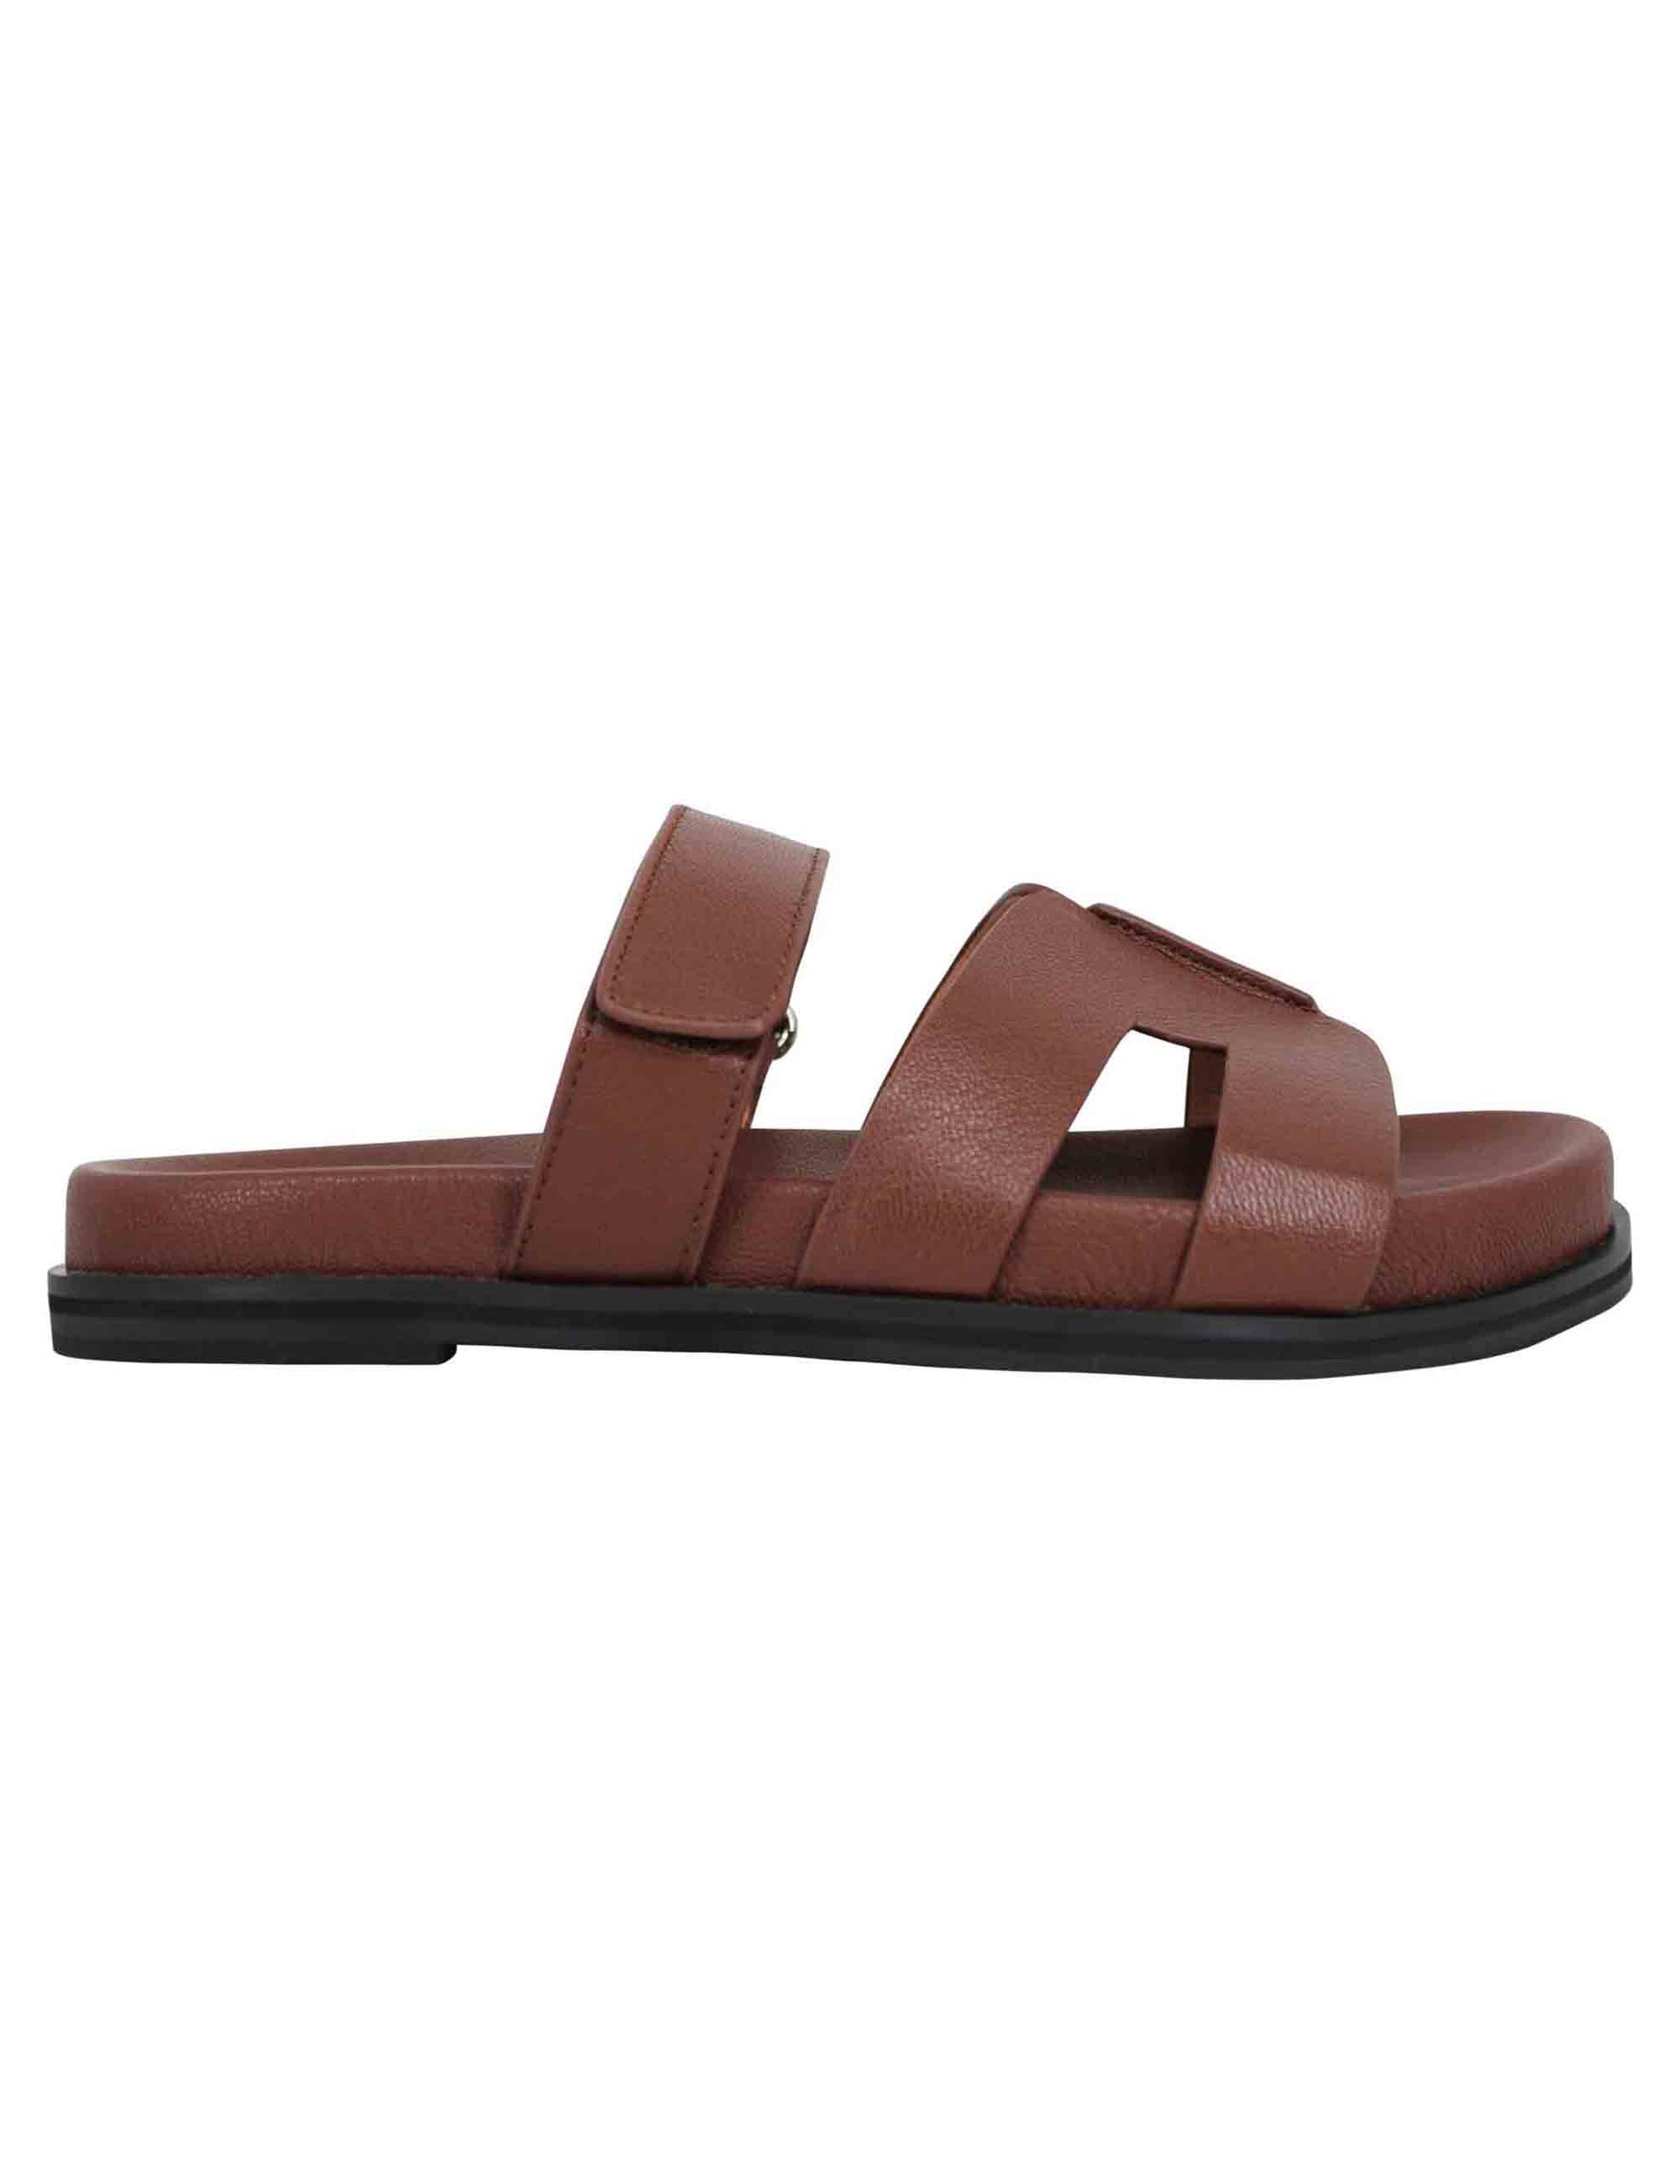 Women's sandals in brown leather with fussbett and low Mindy rubber sole